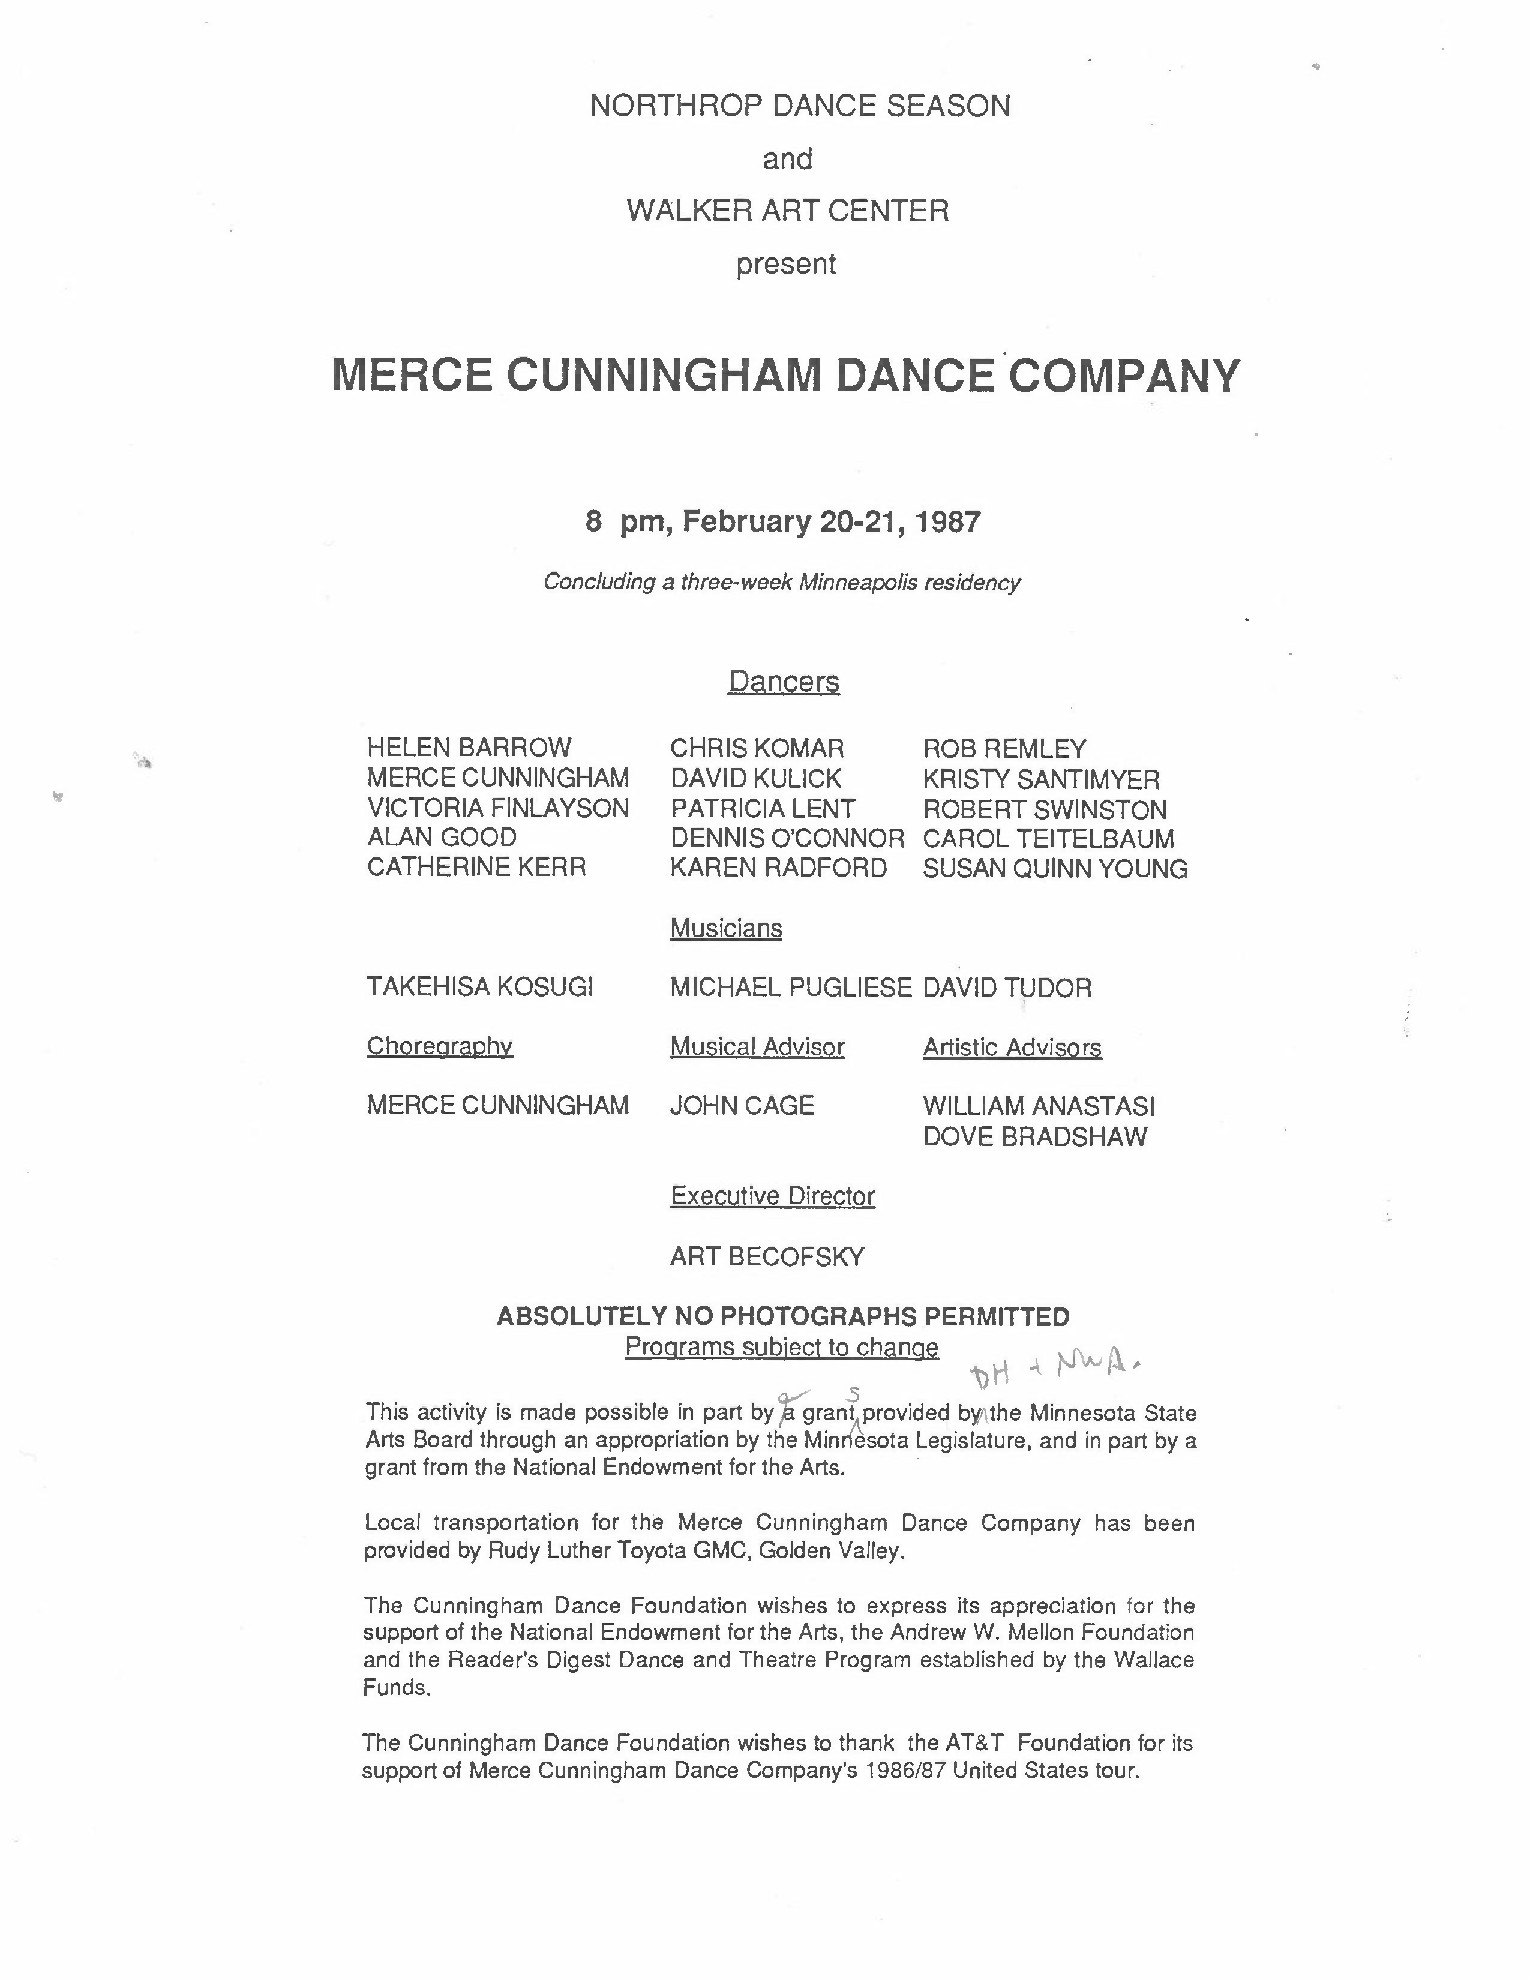 Draft of the program for the 1987 MCDC performance at Northrup, including Fabrications